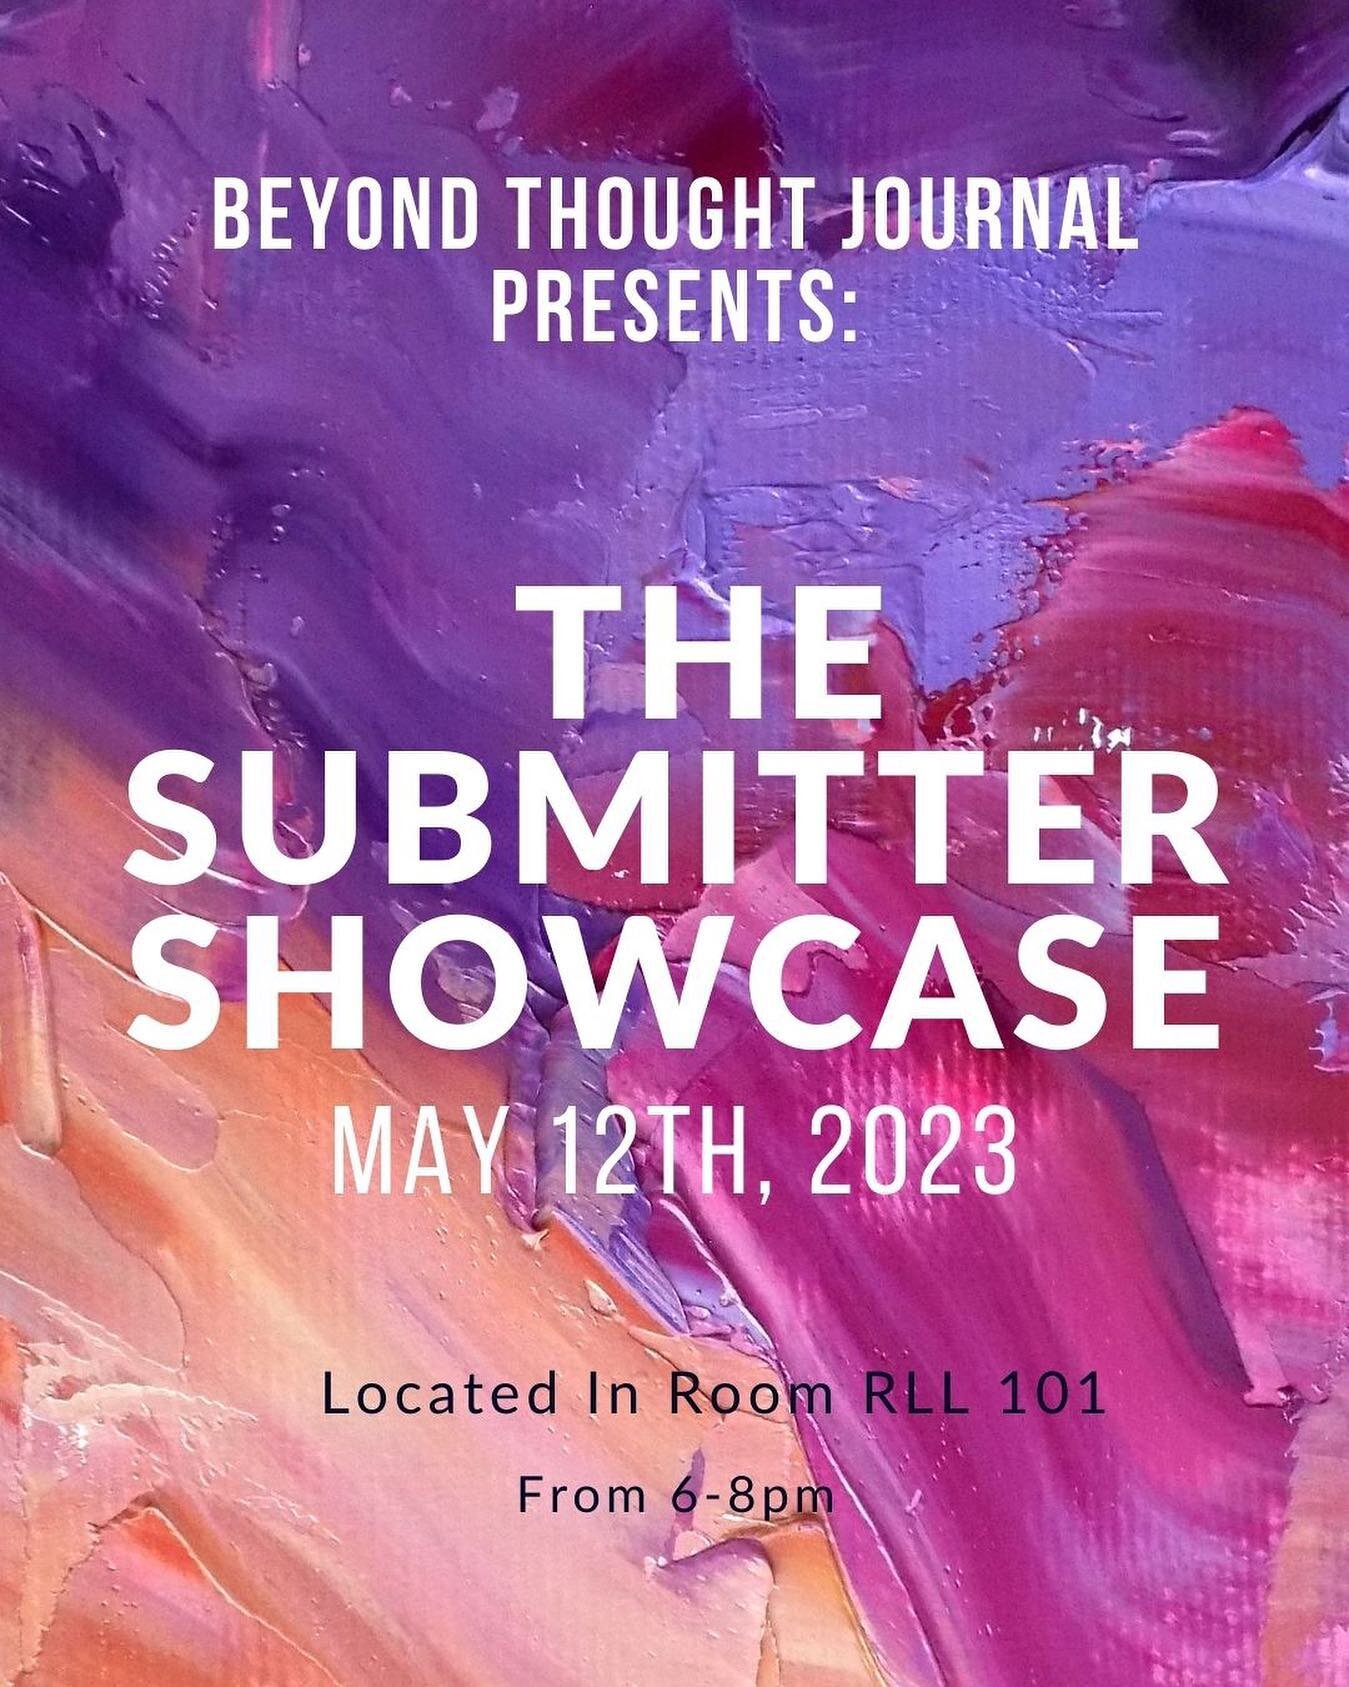 Here at Beyond Thought, we are excited to announce that our submitter showcase is just around the corner 🌟 

Come join us May 12th in room RLL 101 to take a look at some of our past submitter&rsquo;s work live in person🎨🤩

You won&rsquo;t want to 